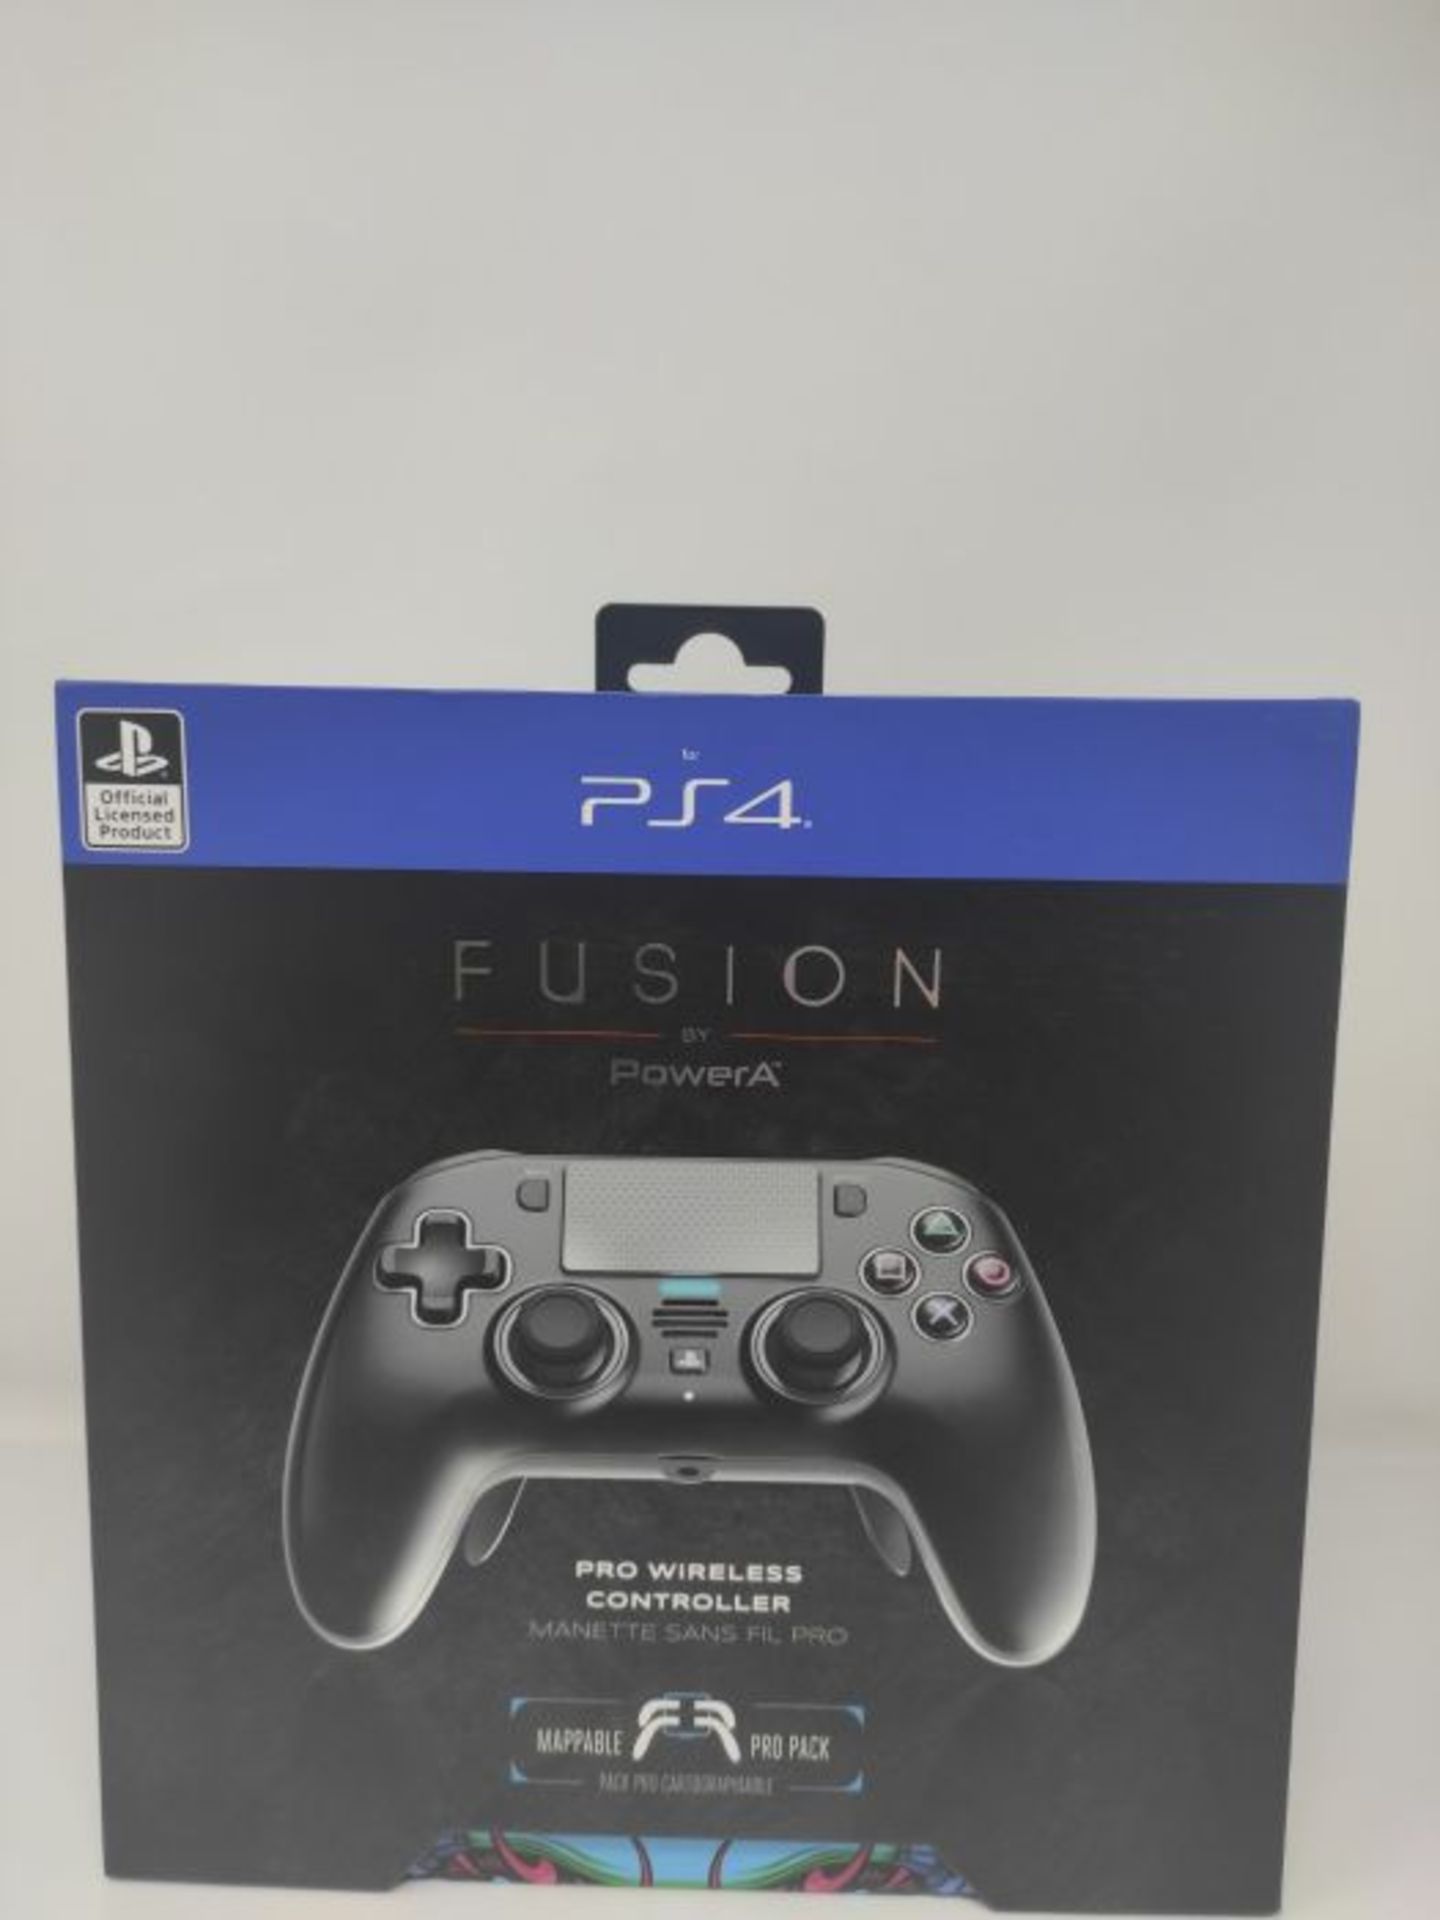 RRP £101.00 FUSION Pro Wireless Controller for PlayStation 4 - PS4 gamepad, PS4 bluetooth controll - Image 2 of 3